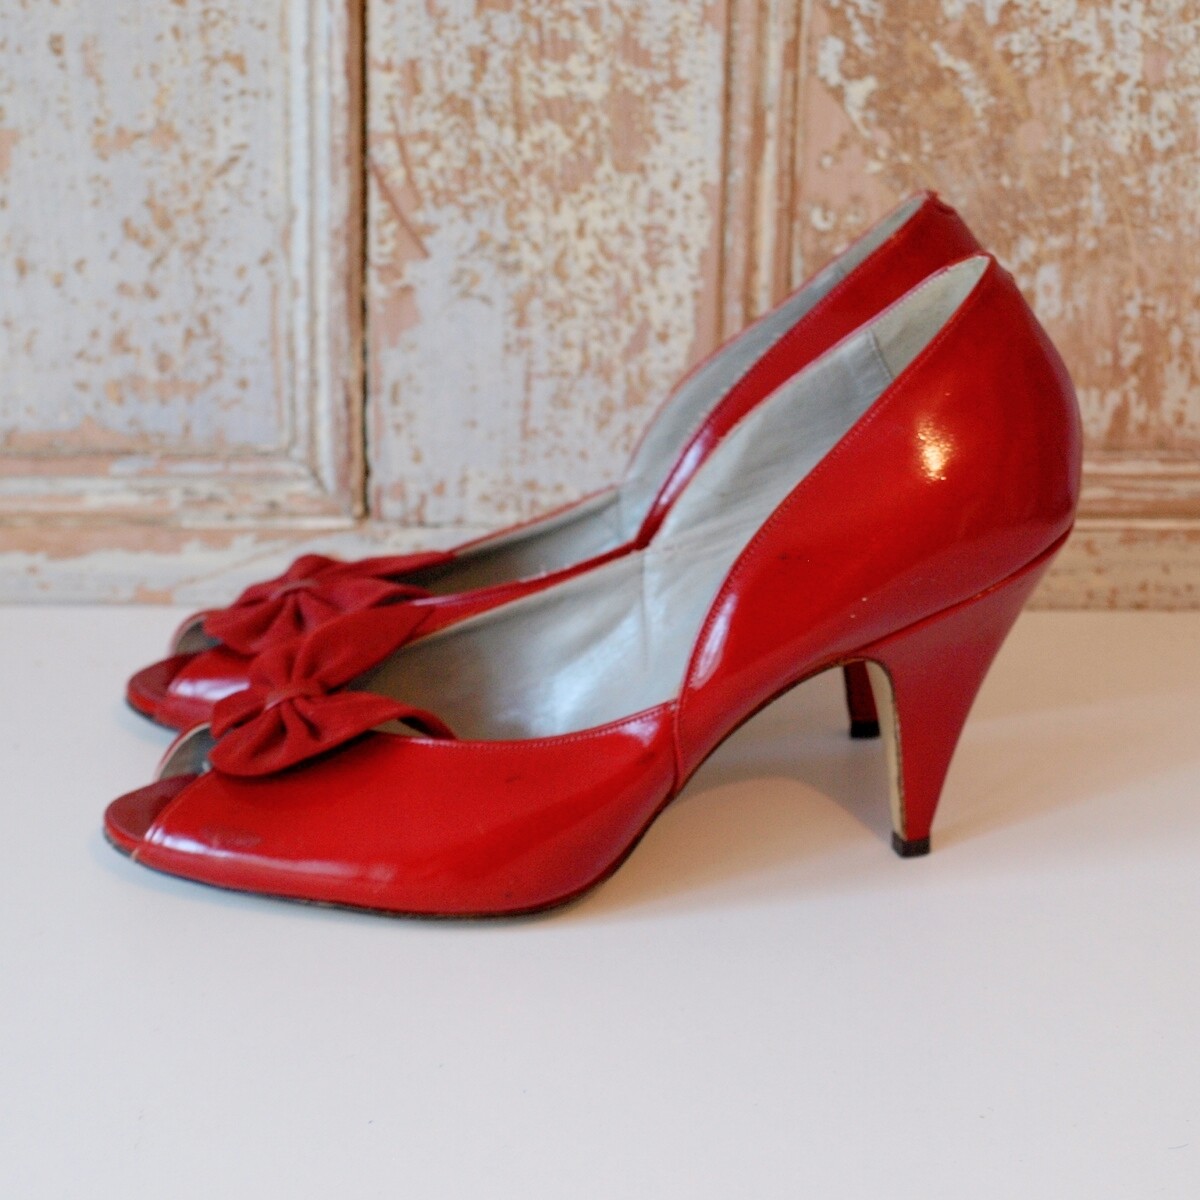 Ladies Red Patent Leather Bow High Heels by Holmes 5.5